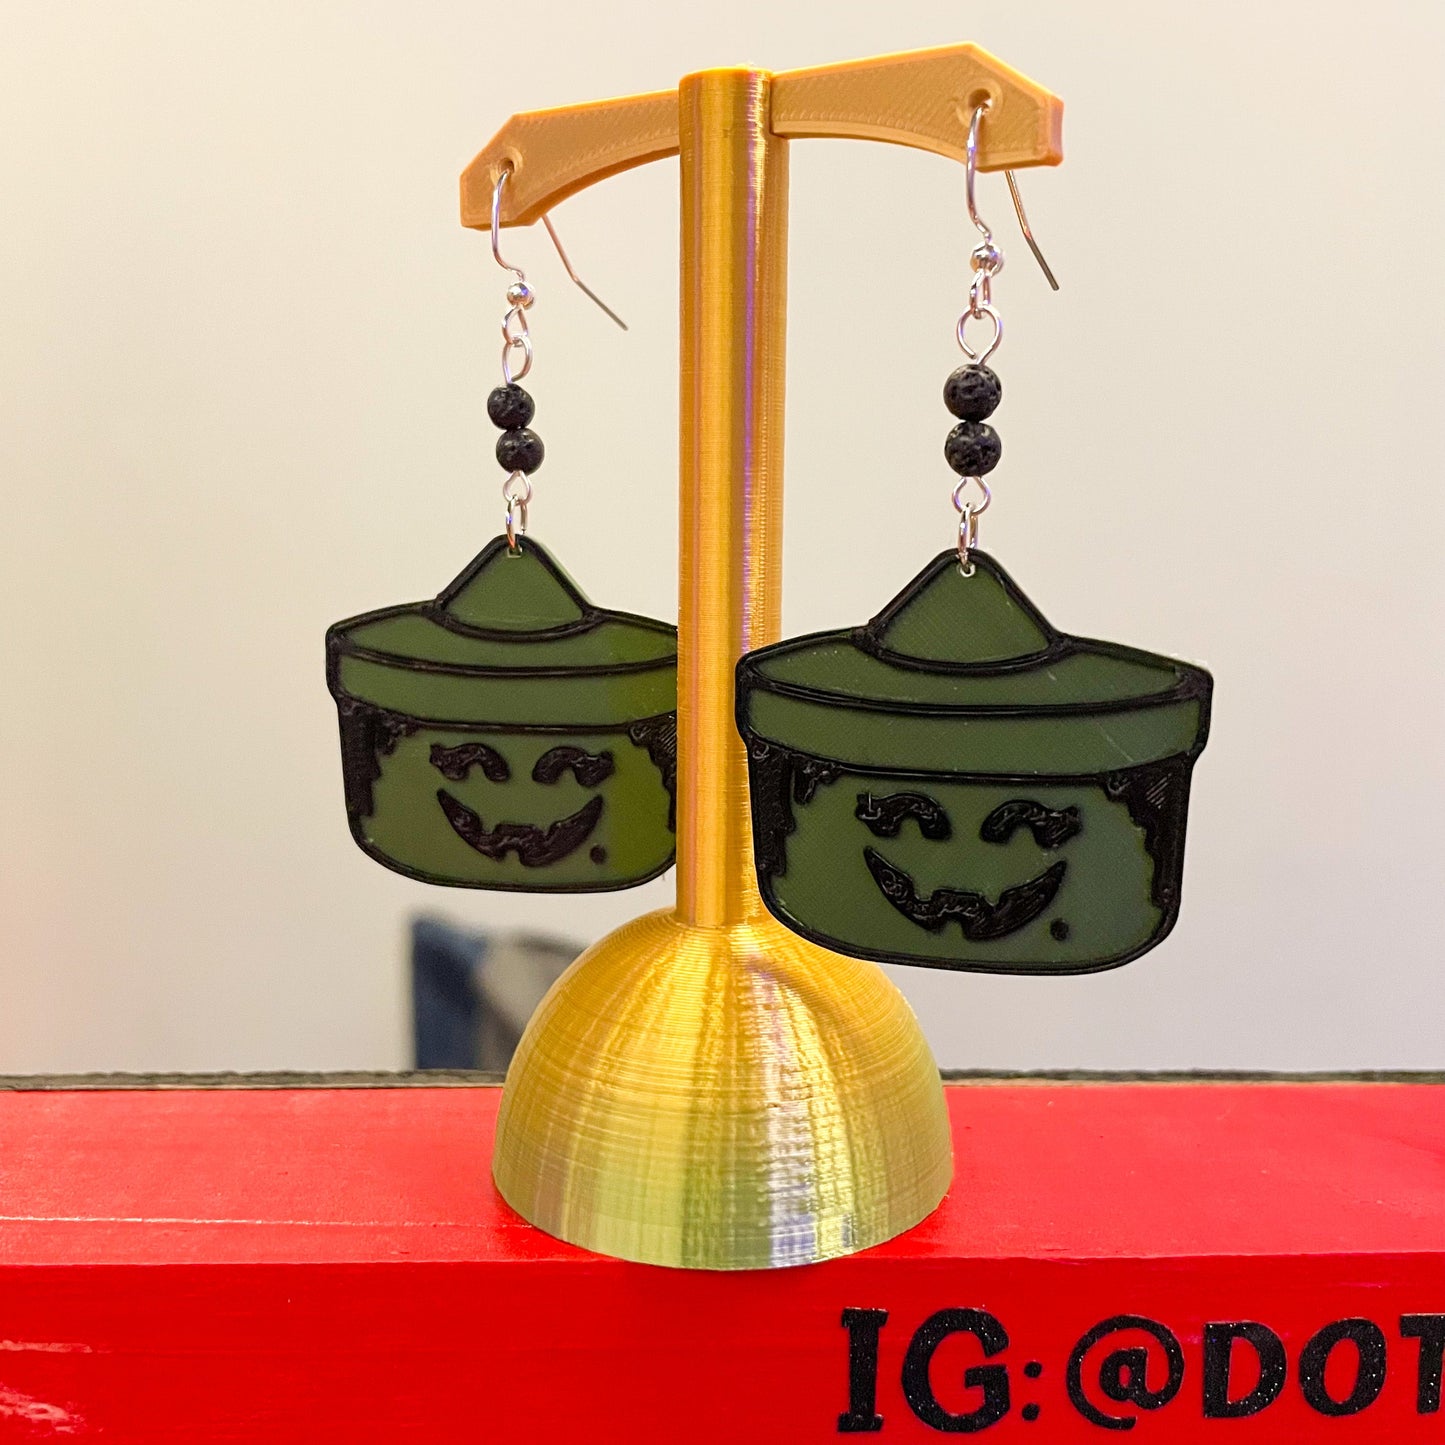 Witch Candy Halloween Bucket earrings | trick or treat, cute | WHOLESALE